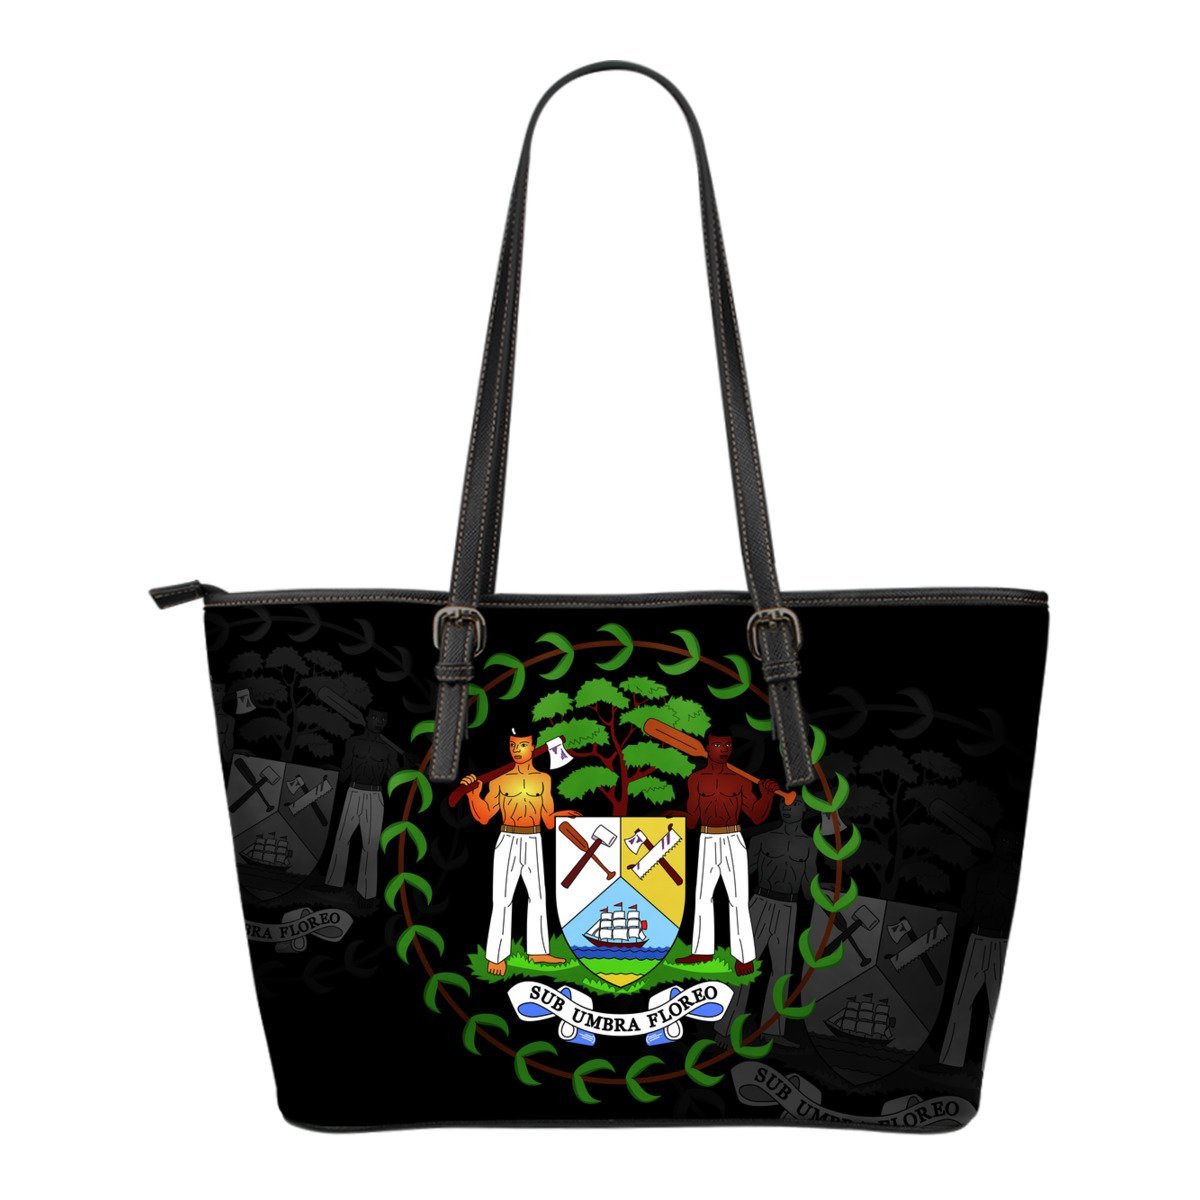 belize-leather-tote-bag-small-size